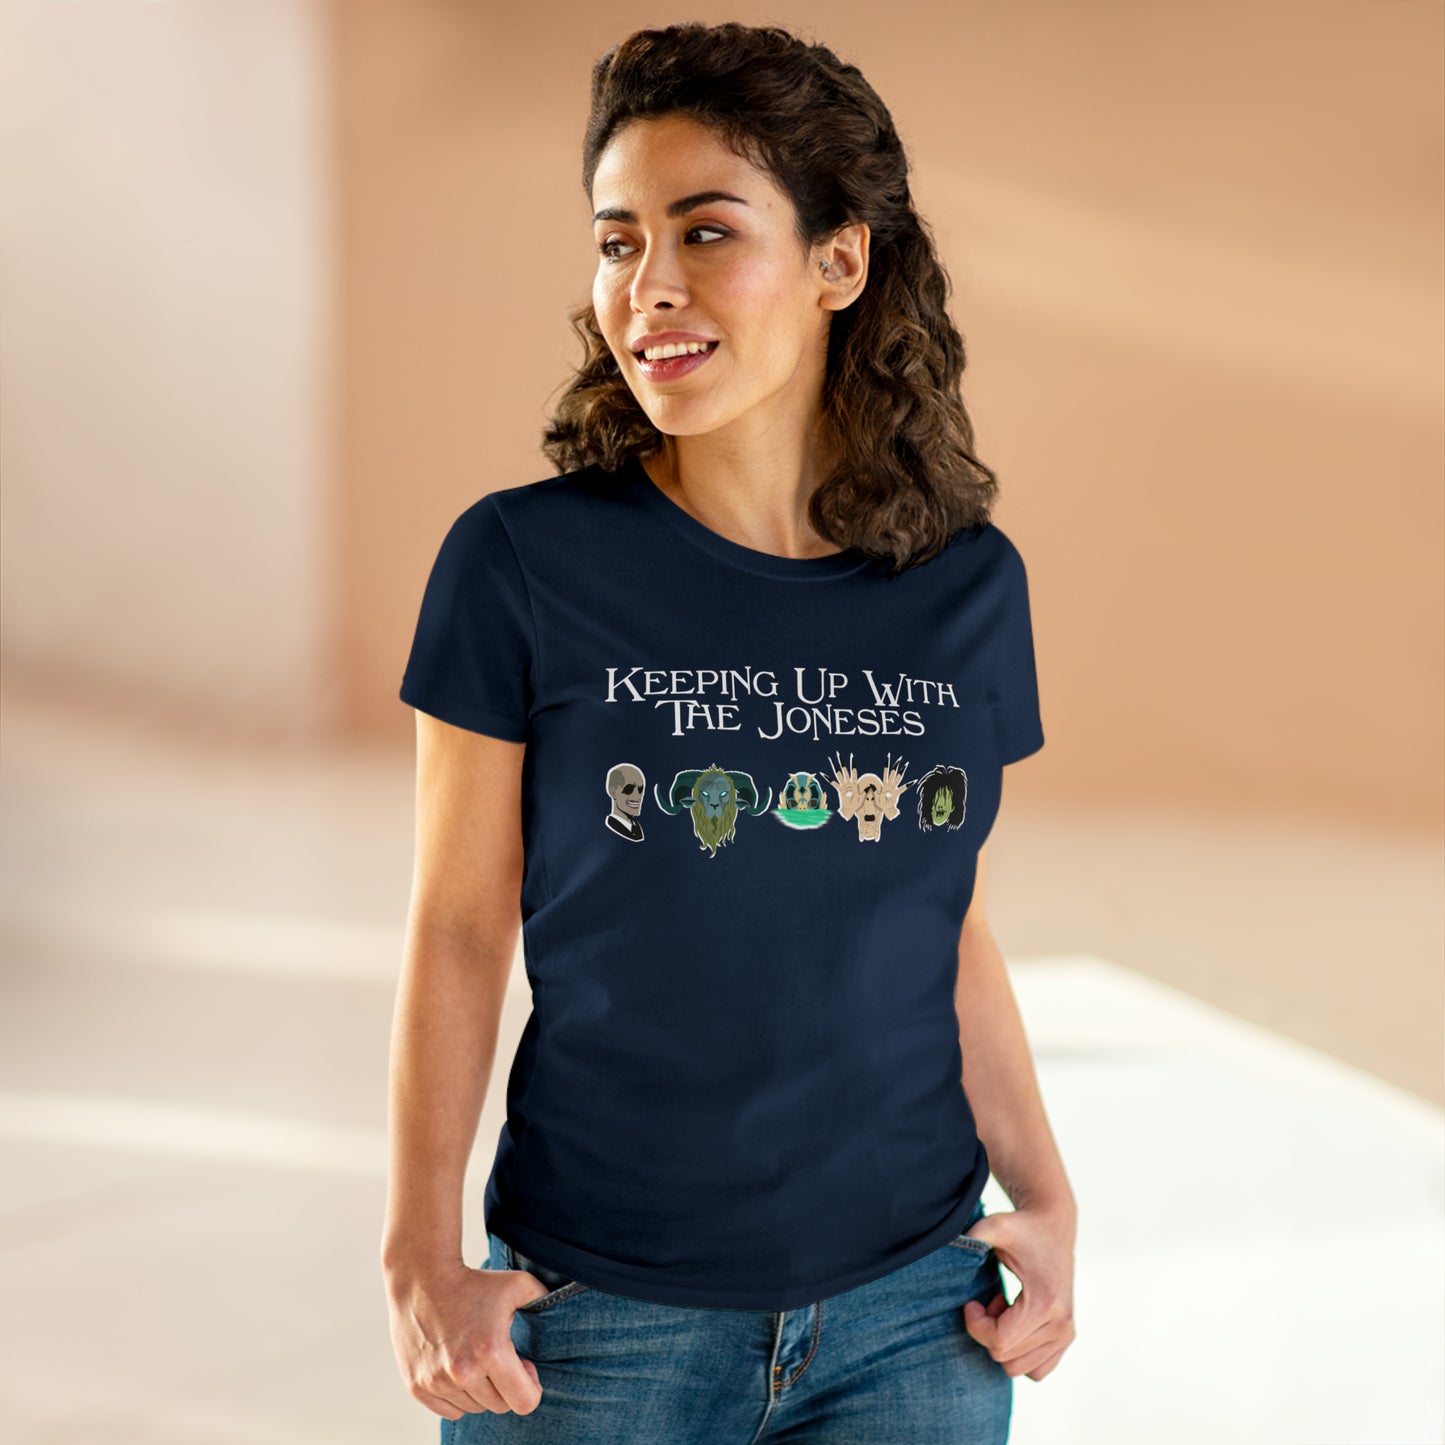 Keeping Up with the Joneses Women’s Tee